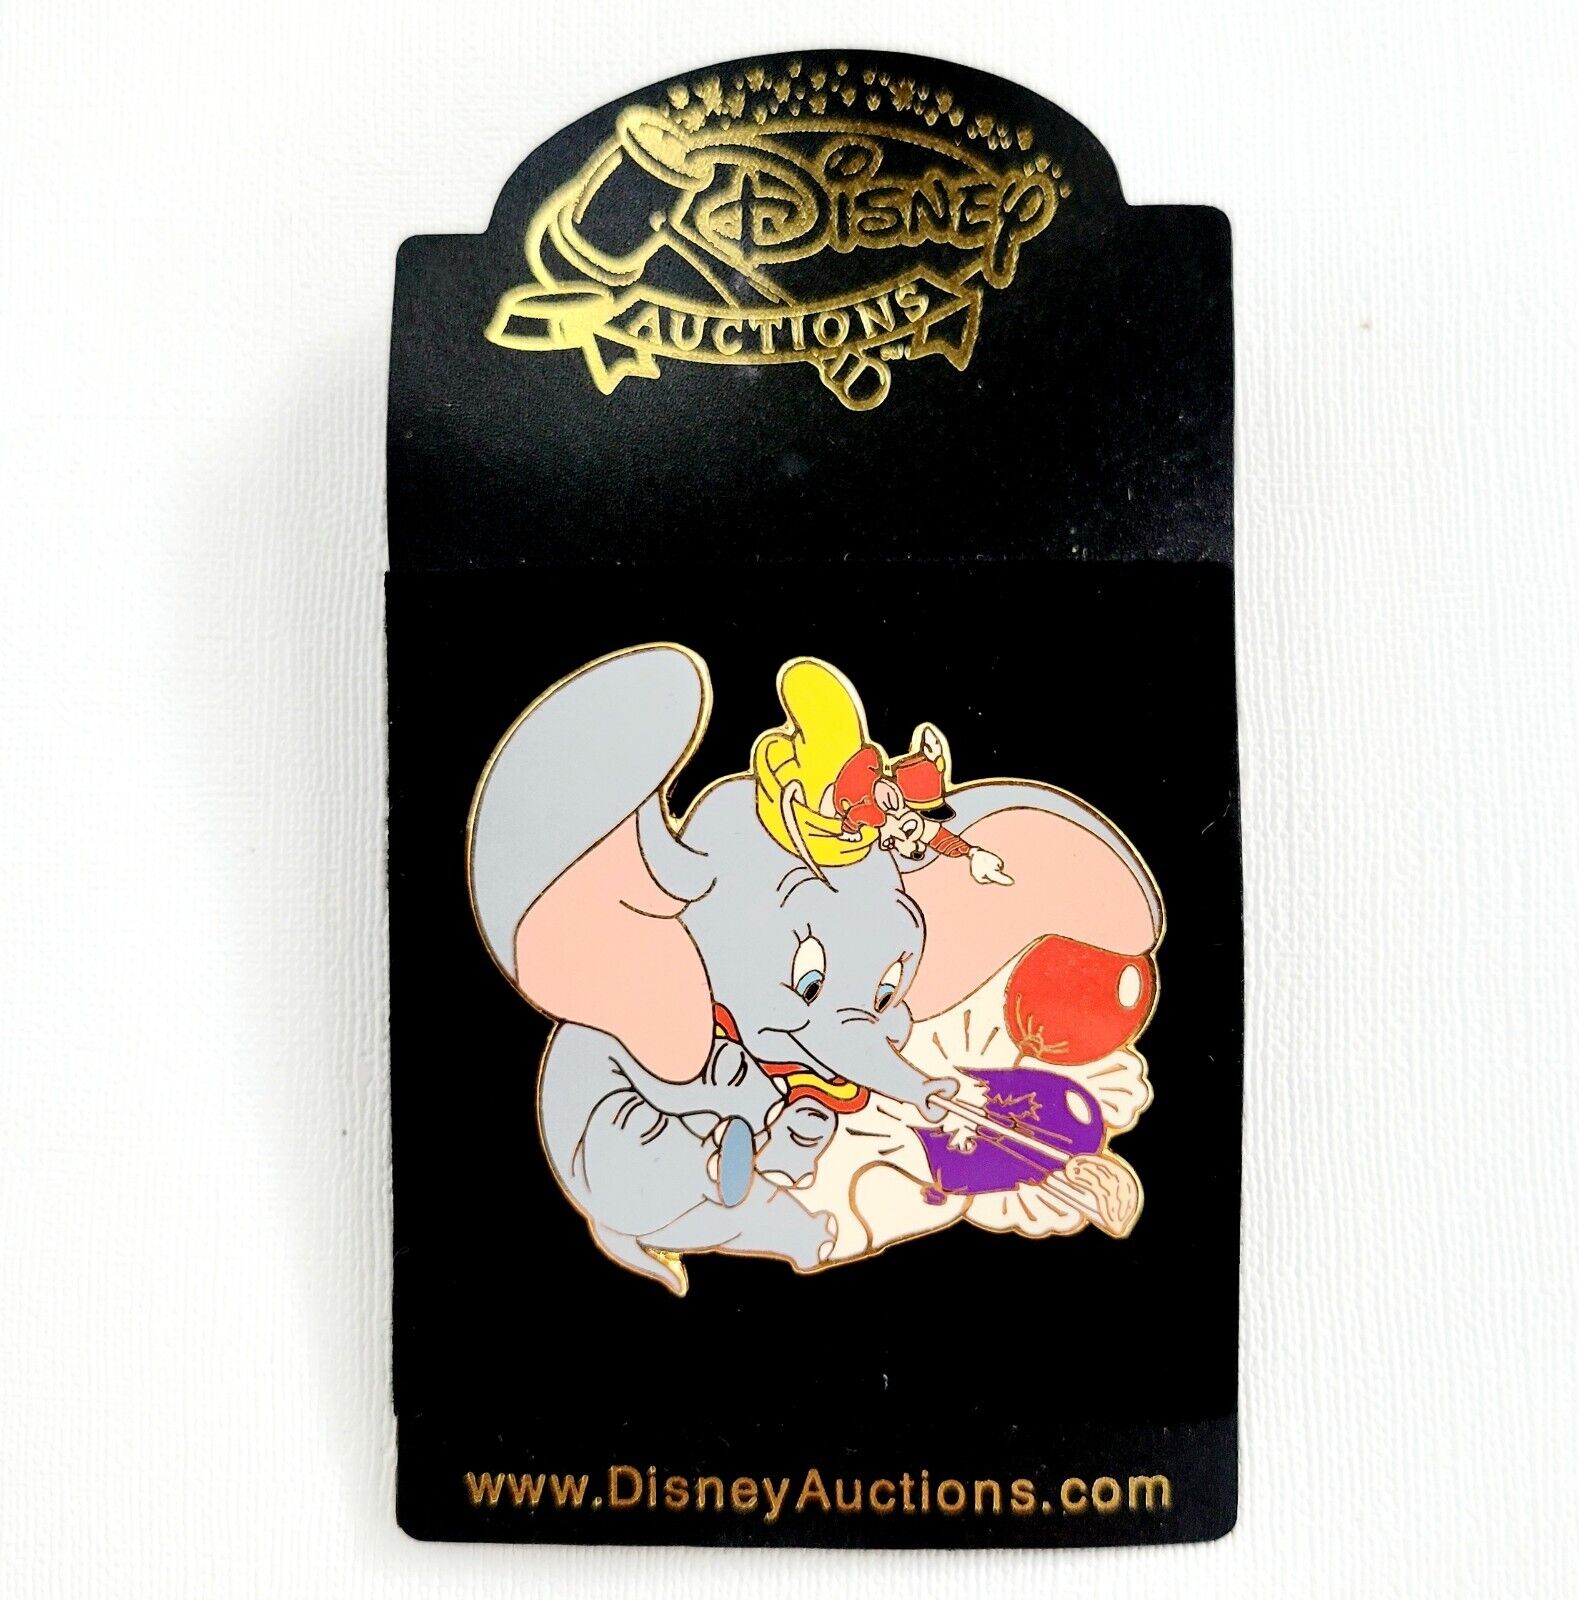 2004 Disney Auctions Dumbo Busting Balloons w/ Peanuts LE 250 Pin Timothy NIP